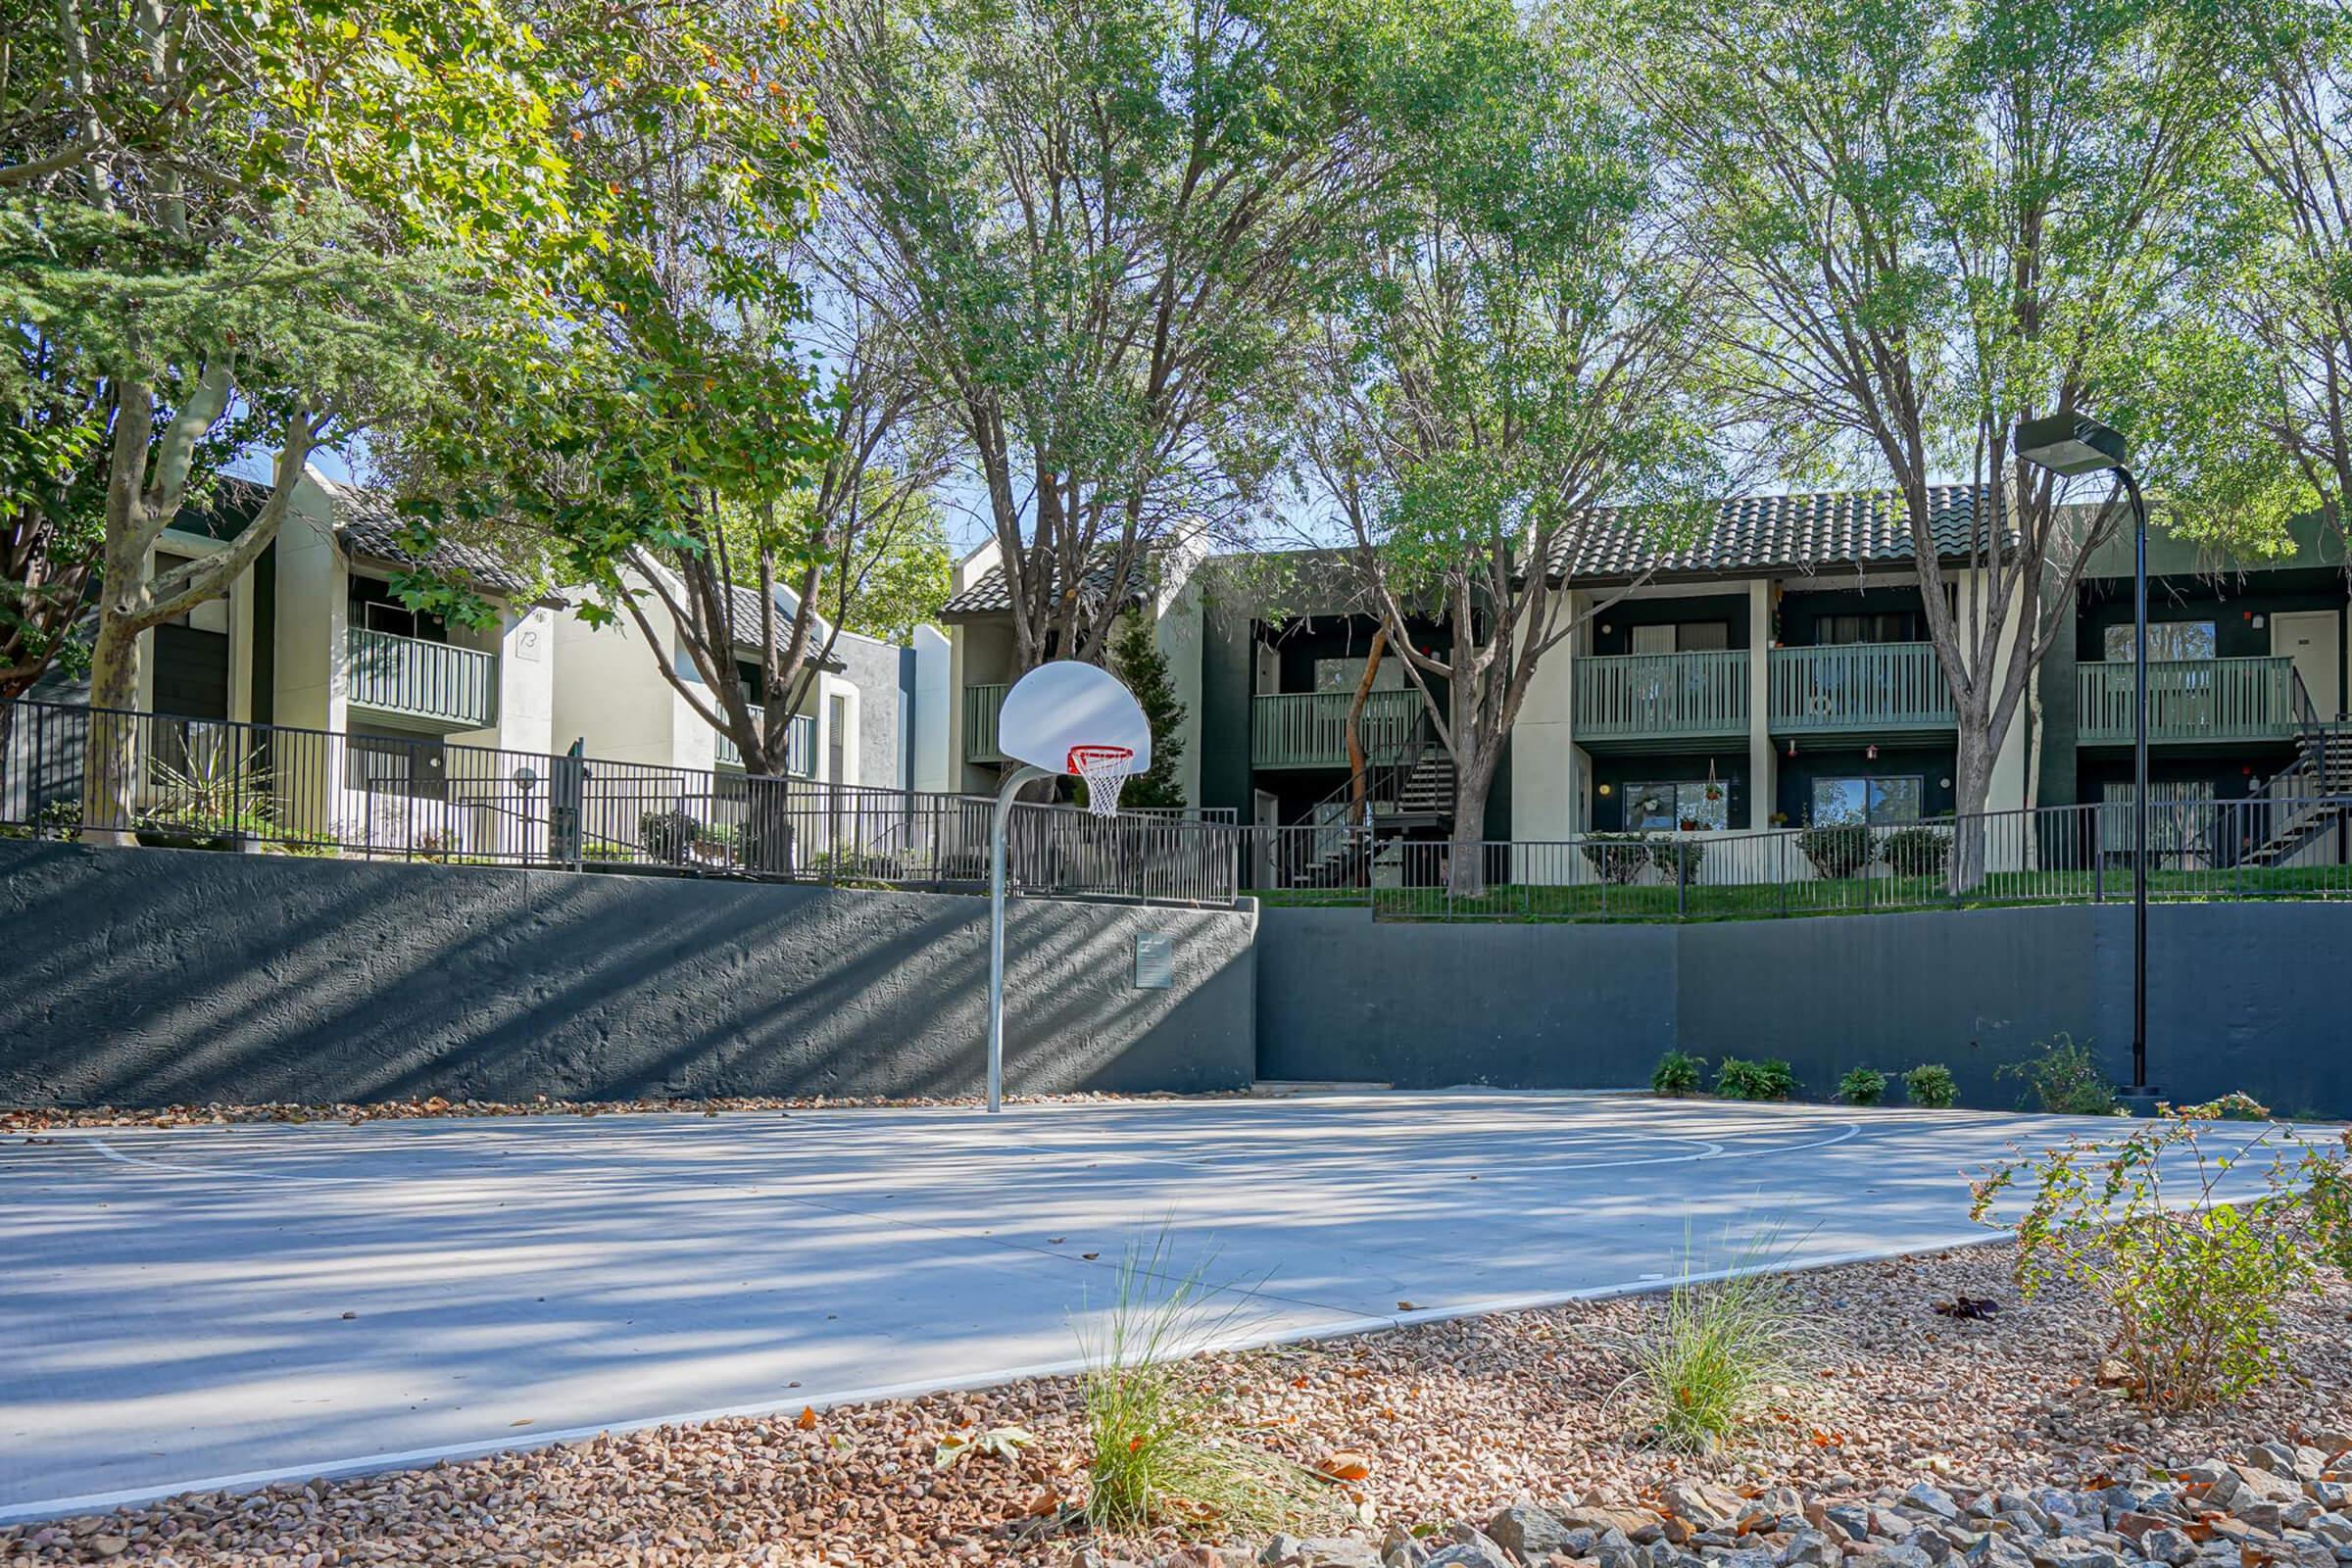 New basketball/sports court at Treehouse Apartments in Albuquerque, New Mexico